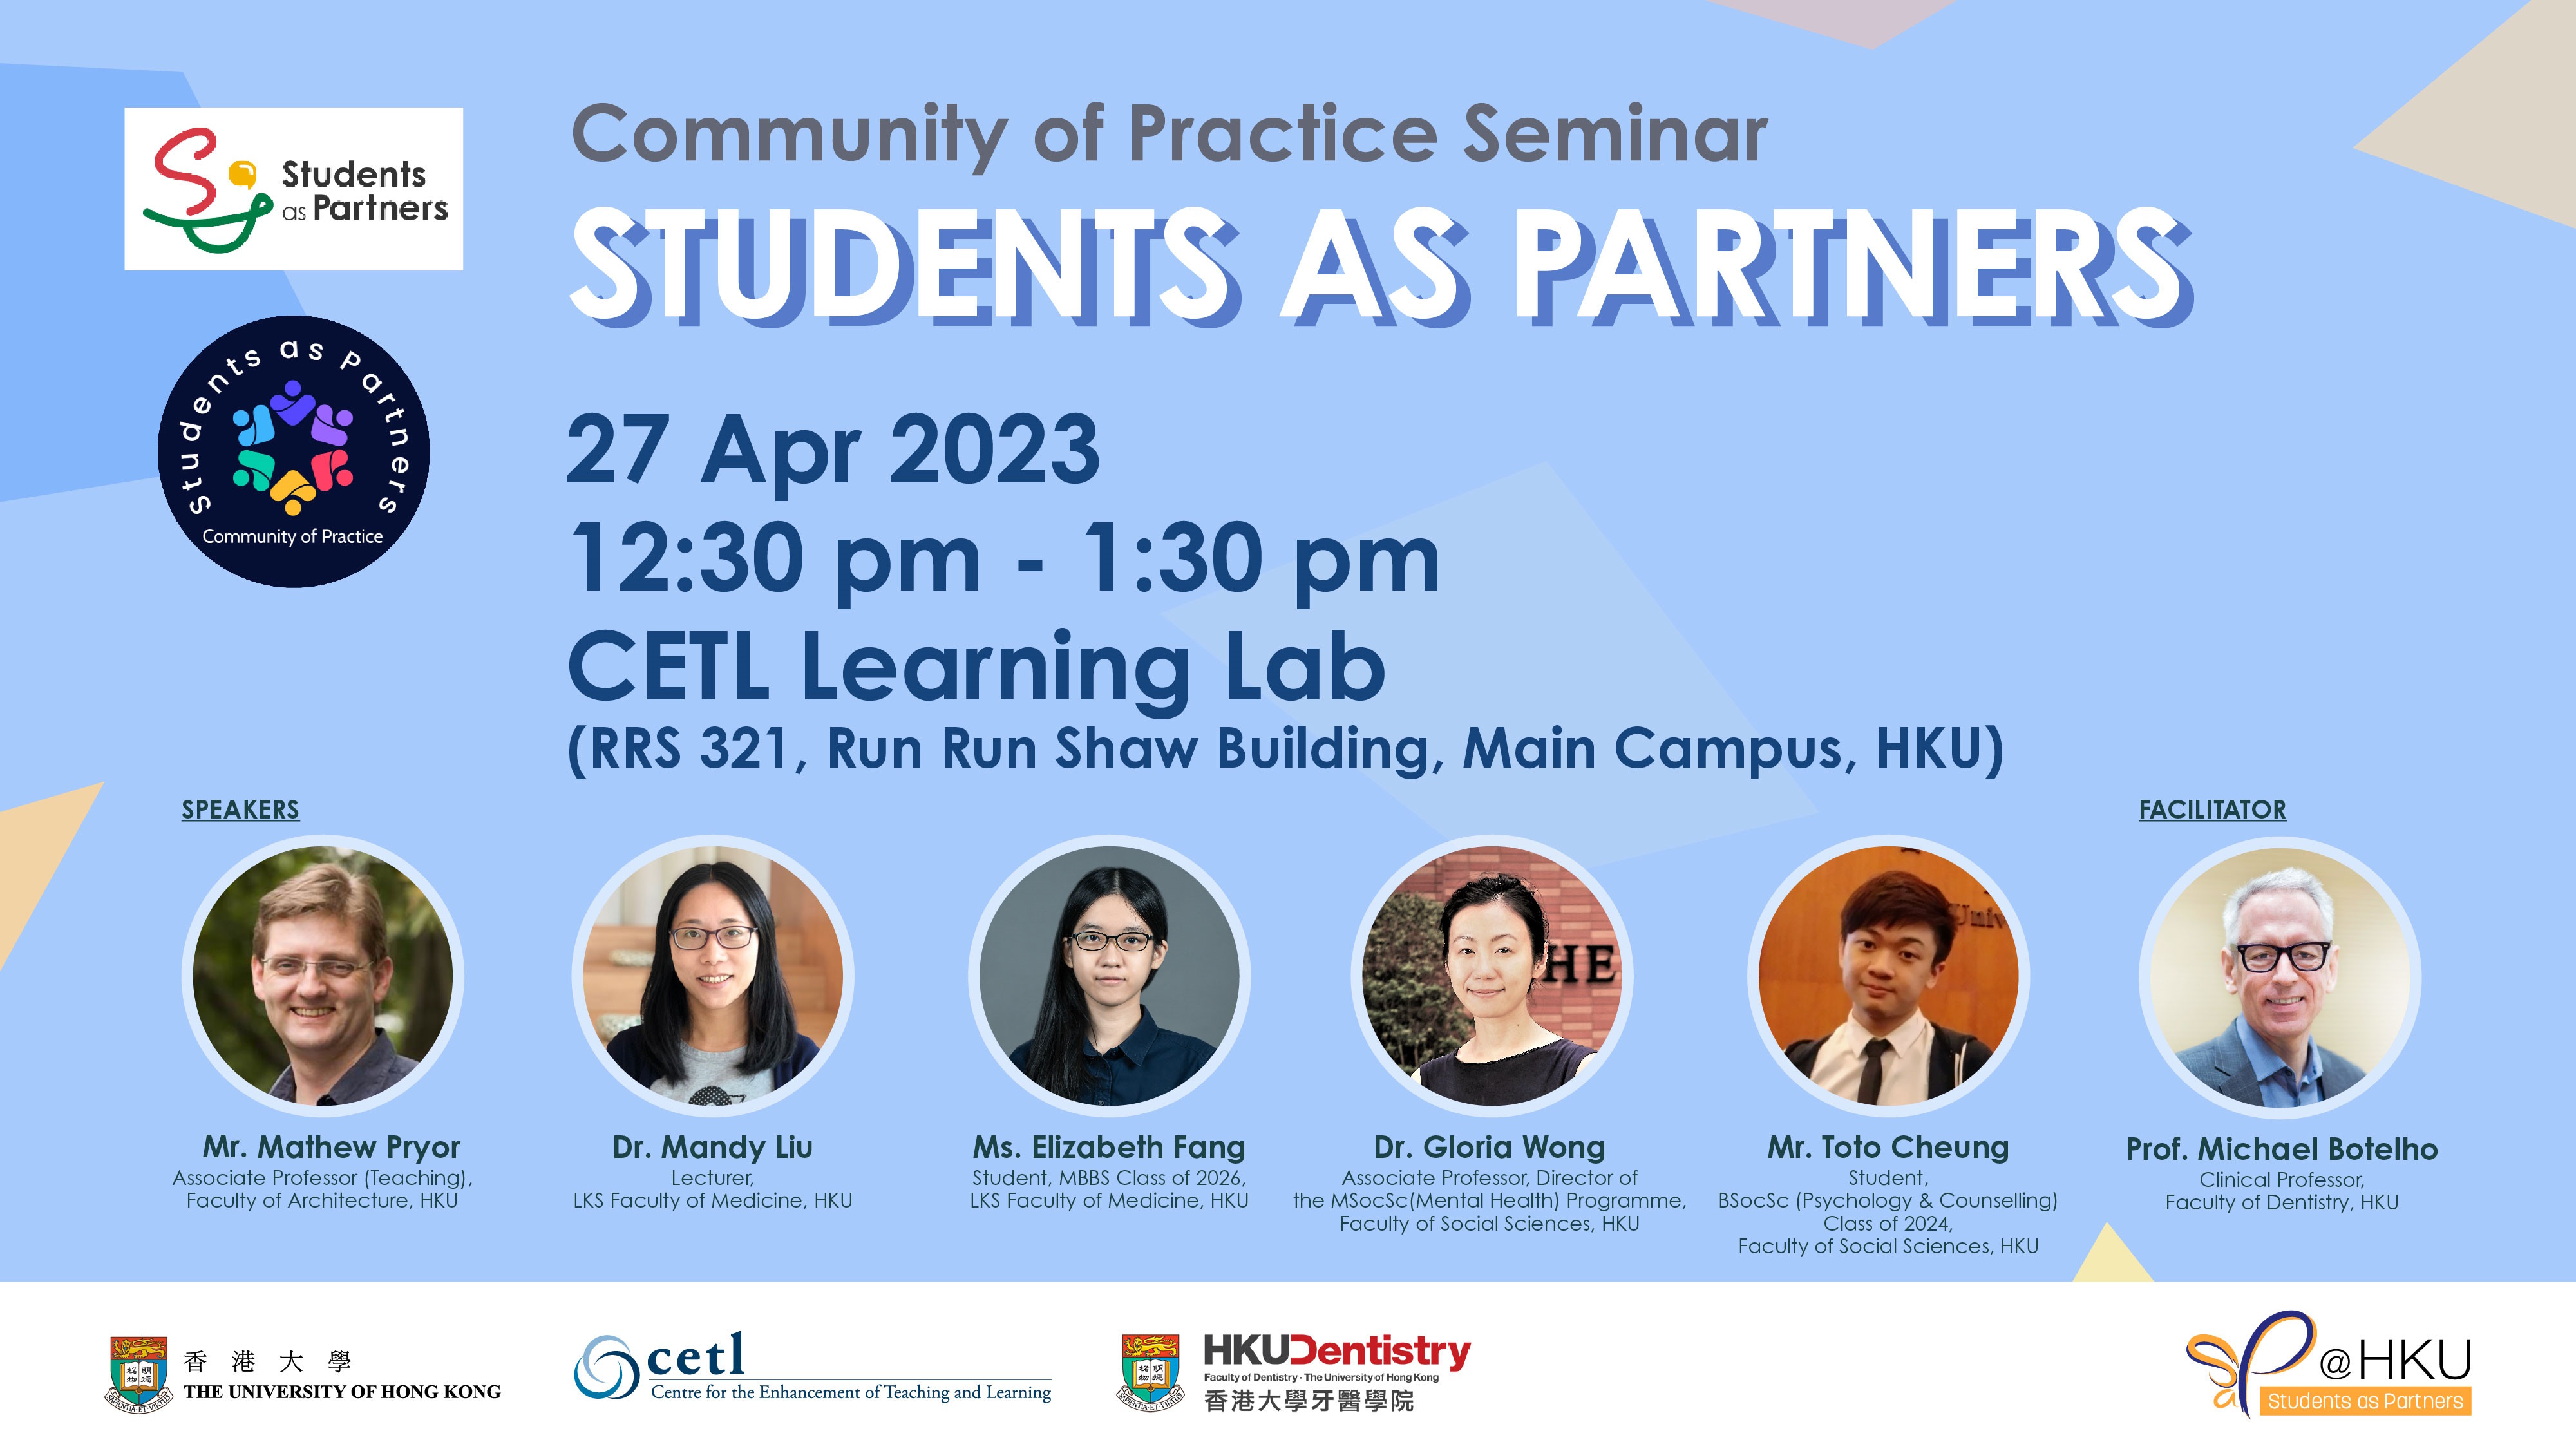 Students as Partners: Community of Practice Seminar